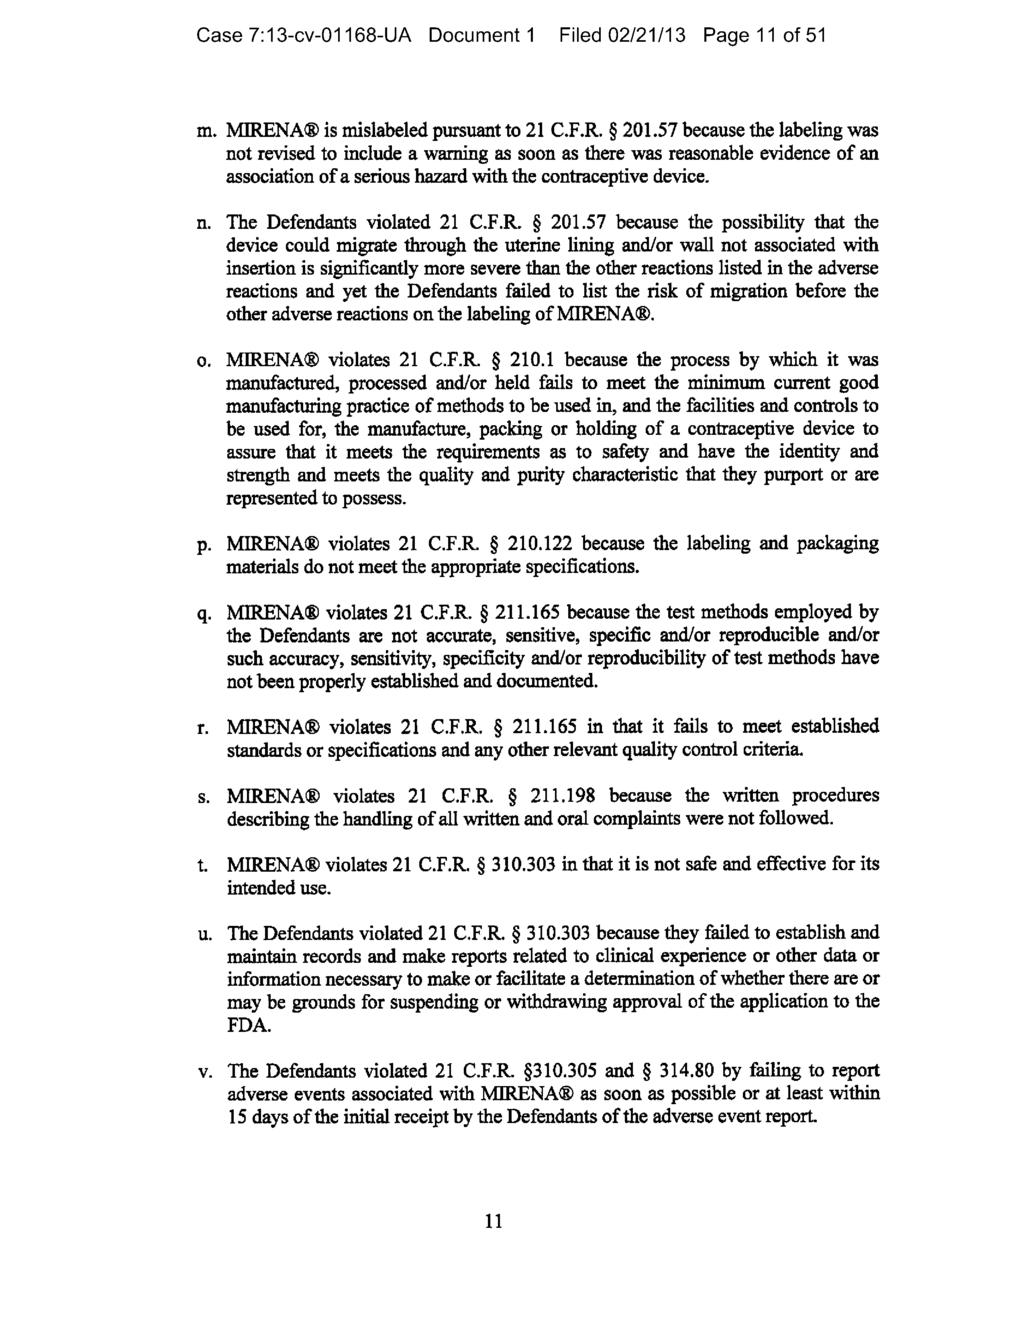 Case 7:13-cv-01168-UA Document 1 Filed 02/21/13 Page 11 of 51 m. MIRENA is mislabeled pursuant to 21 C.F.R. 201.